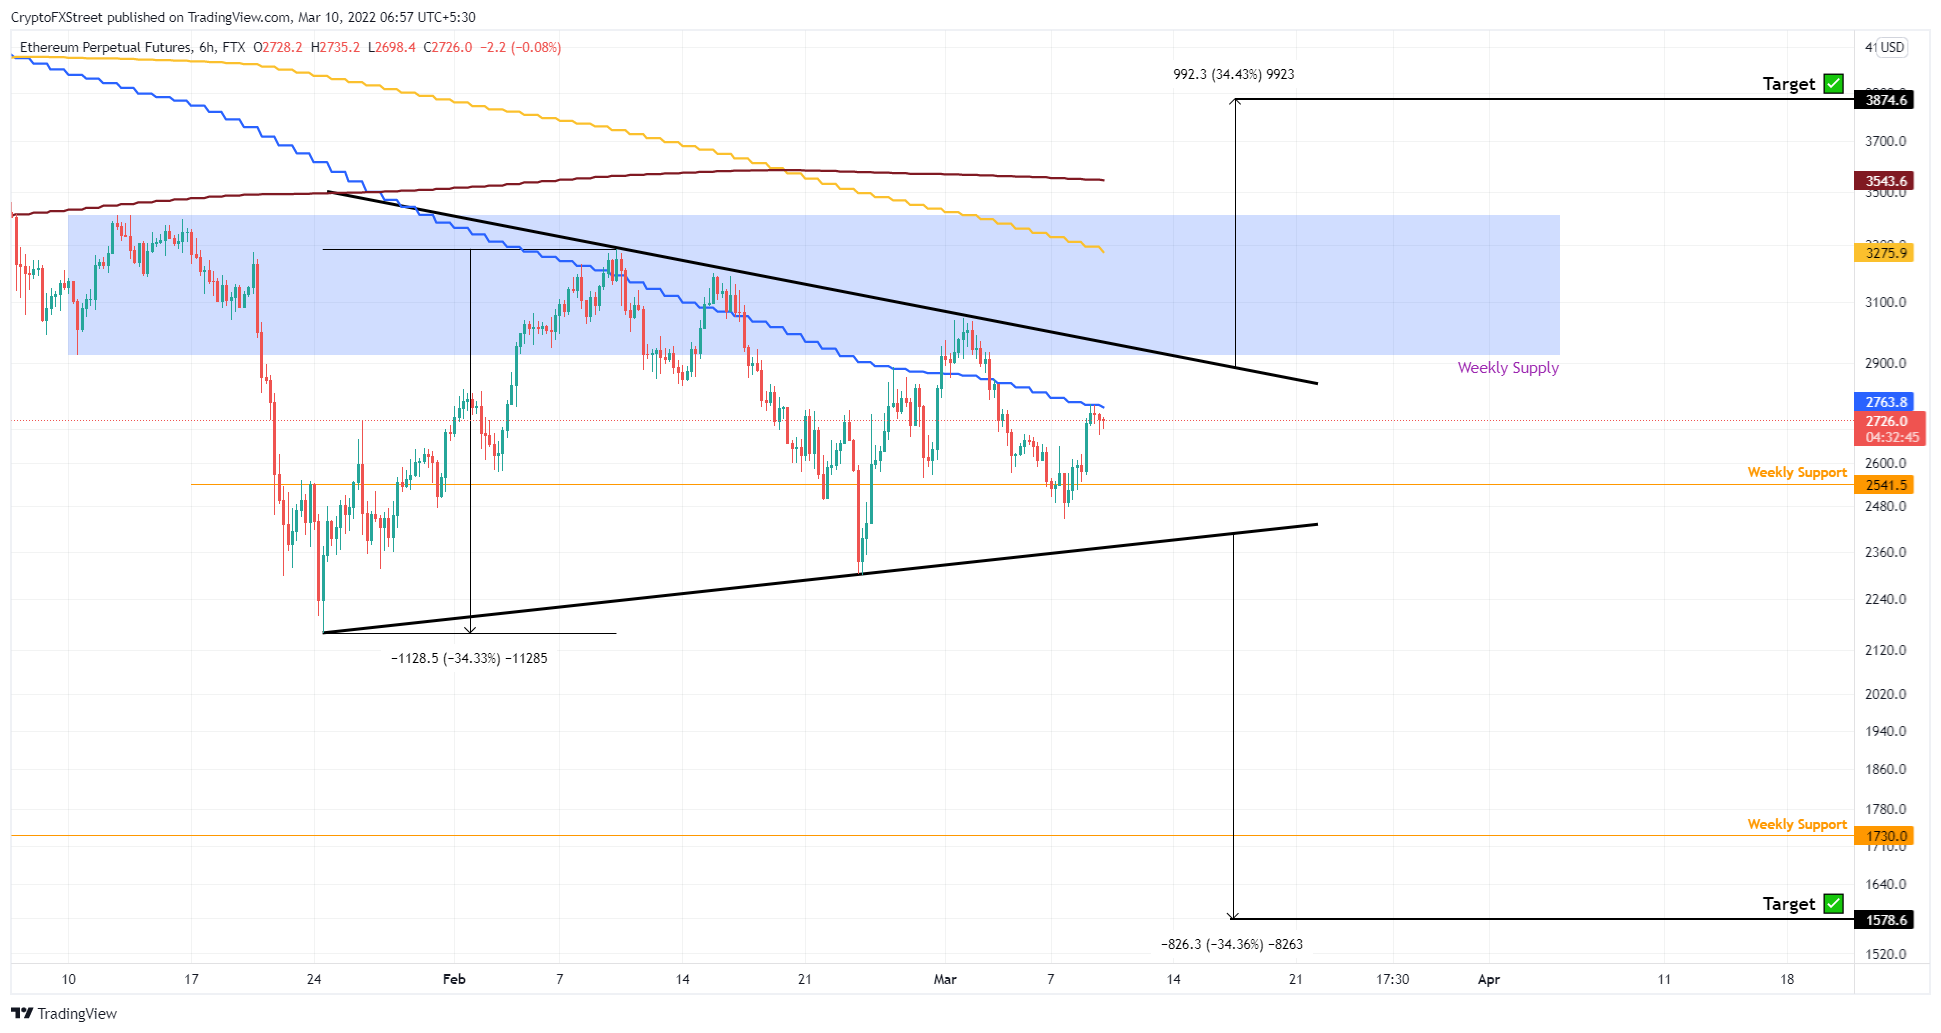 Ethereum price consolidates before a 34% breakout - 1